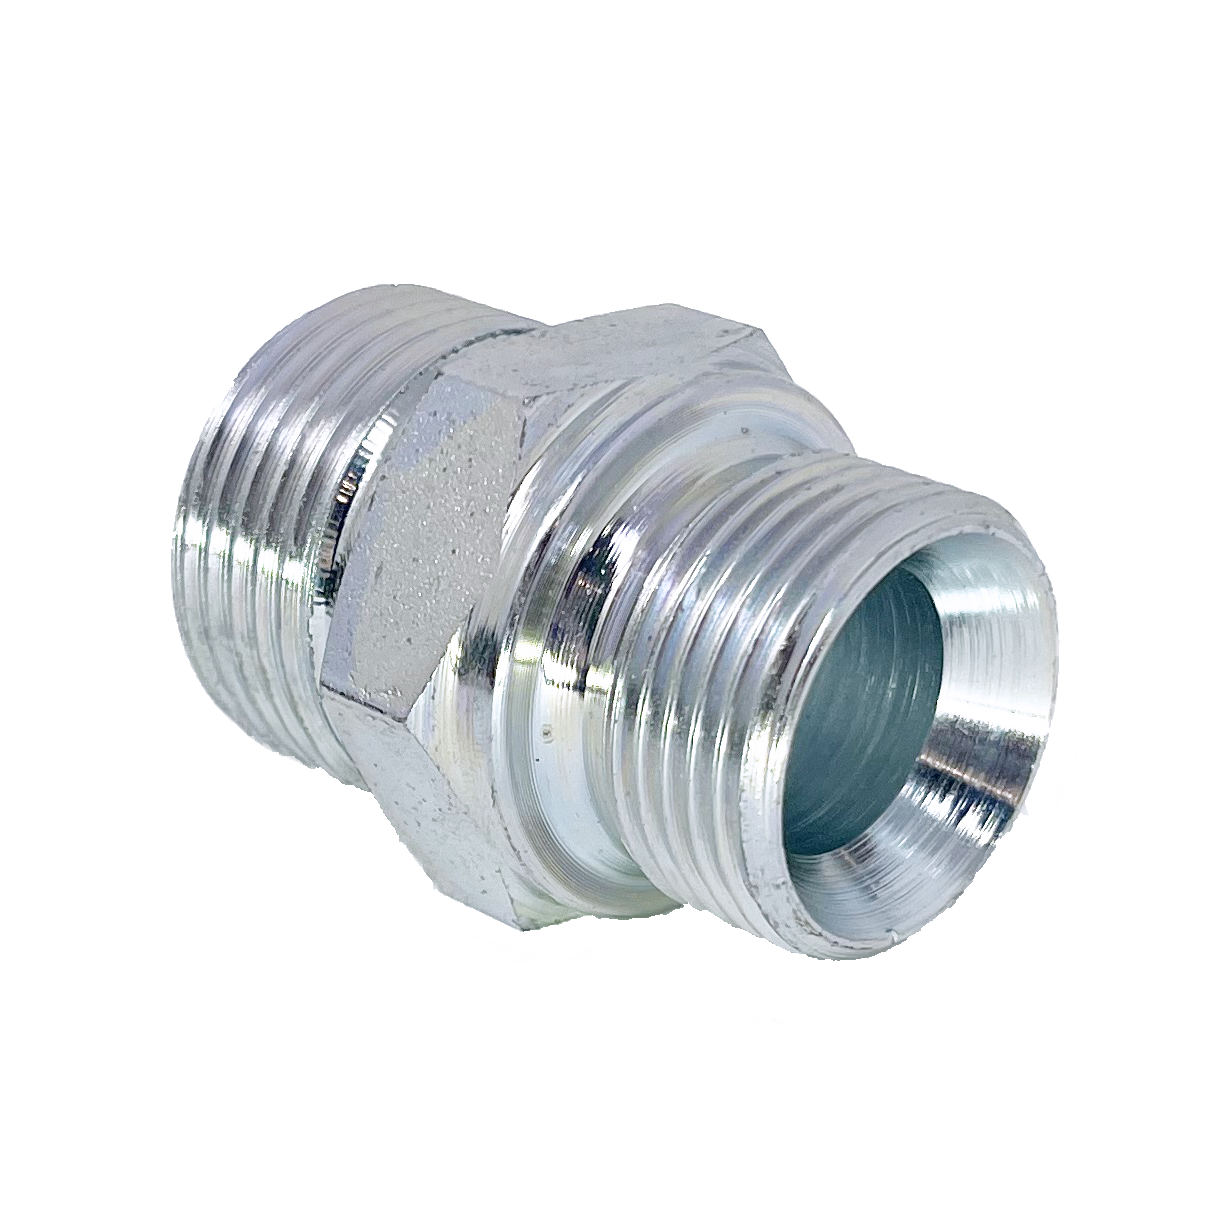 6005-24-24 : Adaptall Straight Adapter, Male 1.5 (1-1/2") ORFS x Male 1.5 (1-1/2") BSPP, Carbon Steel